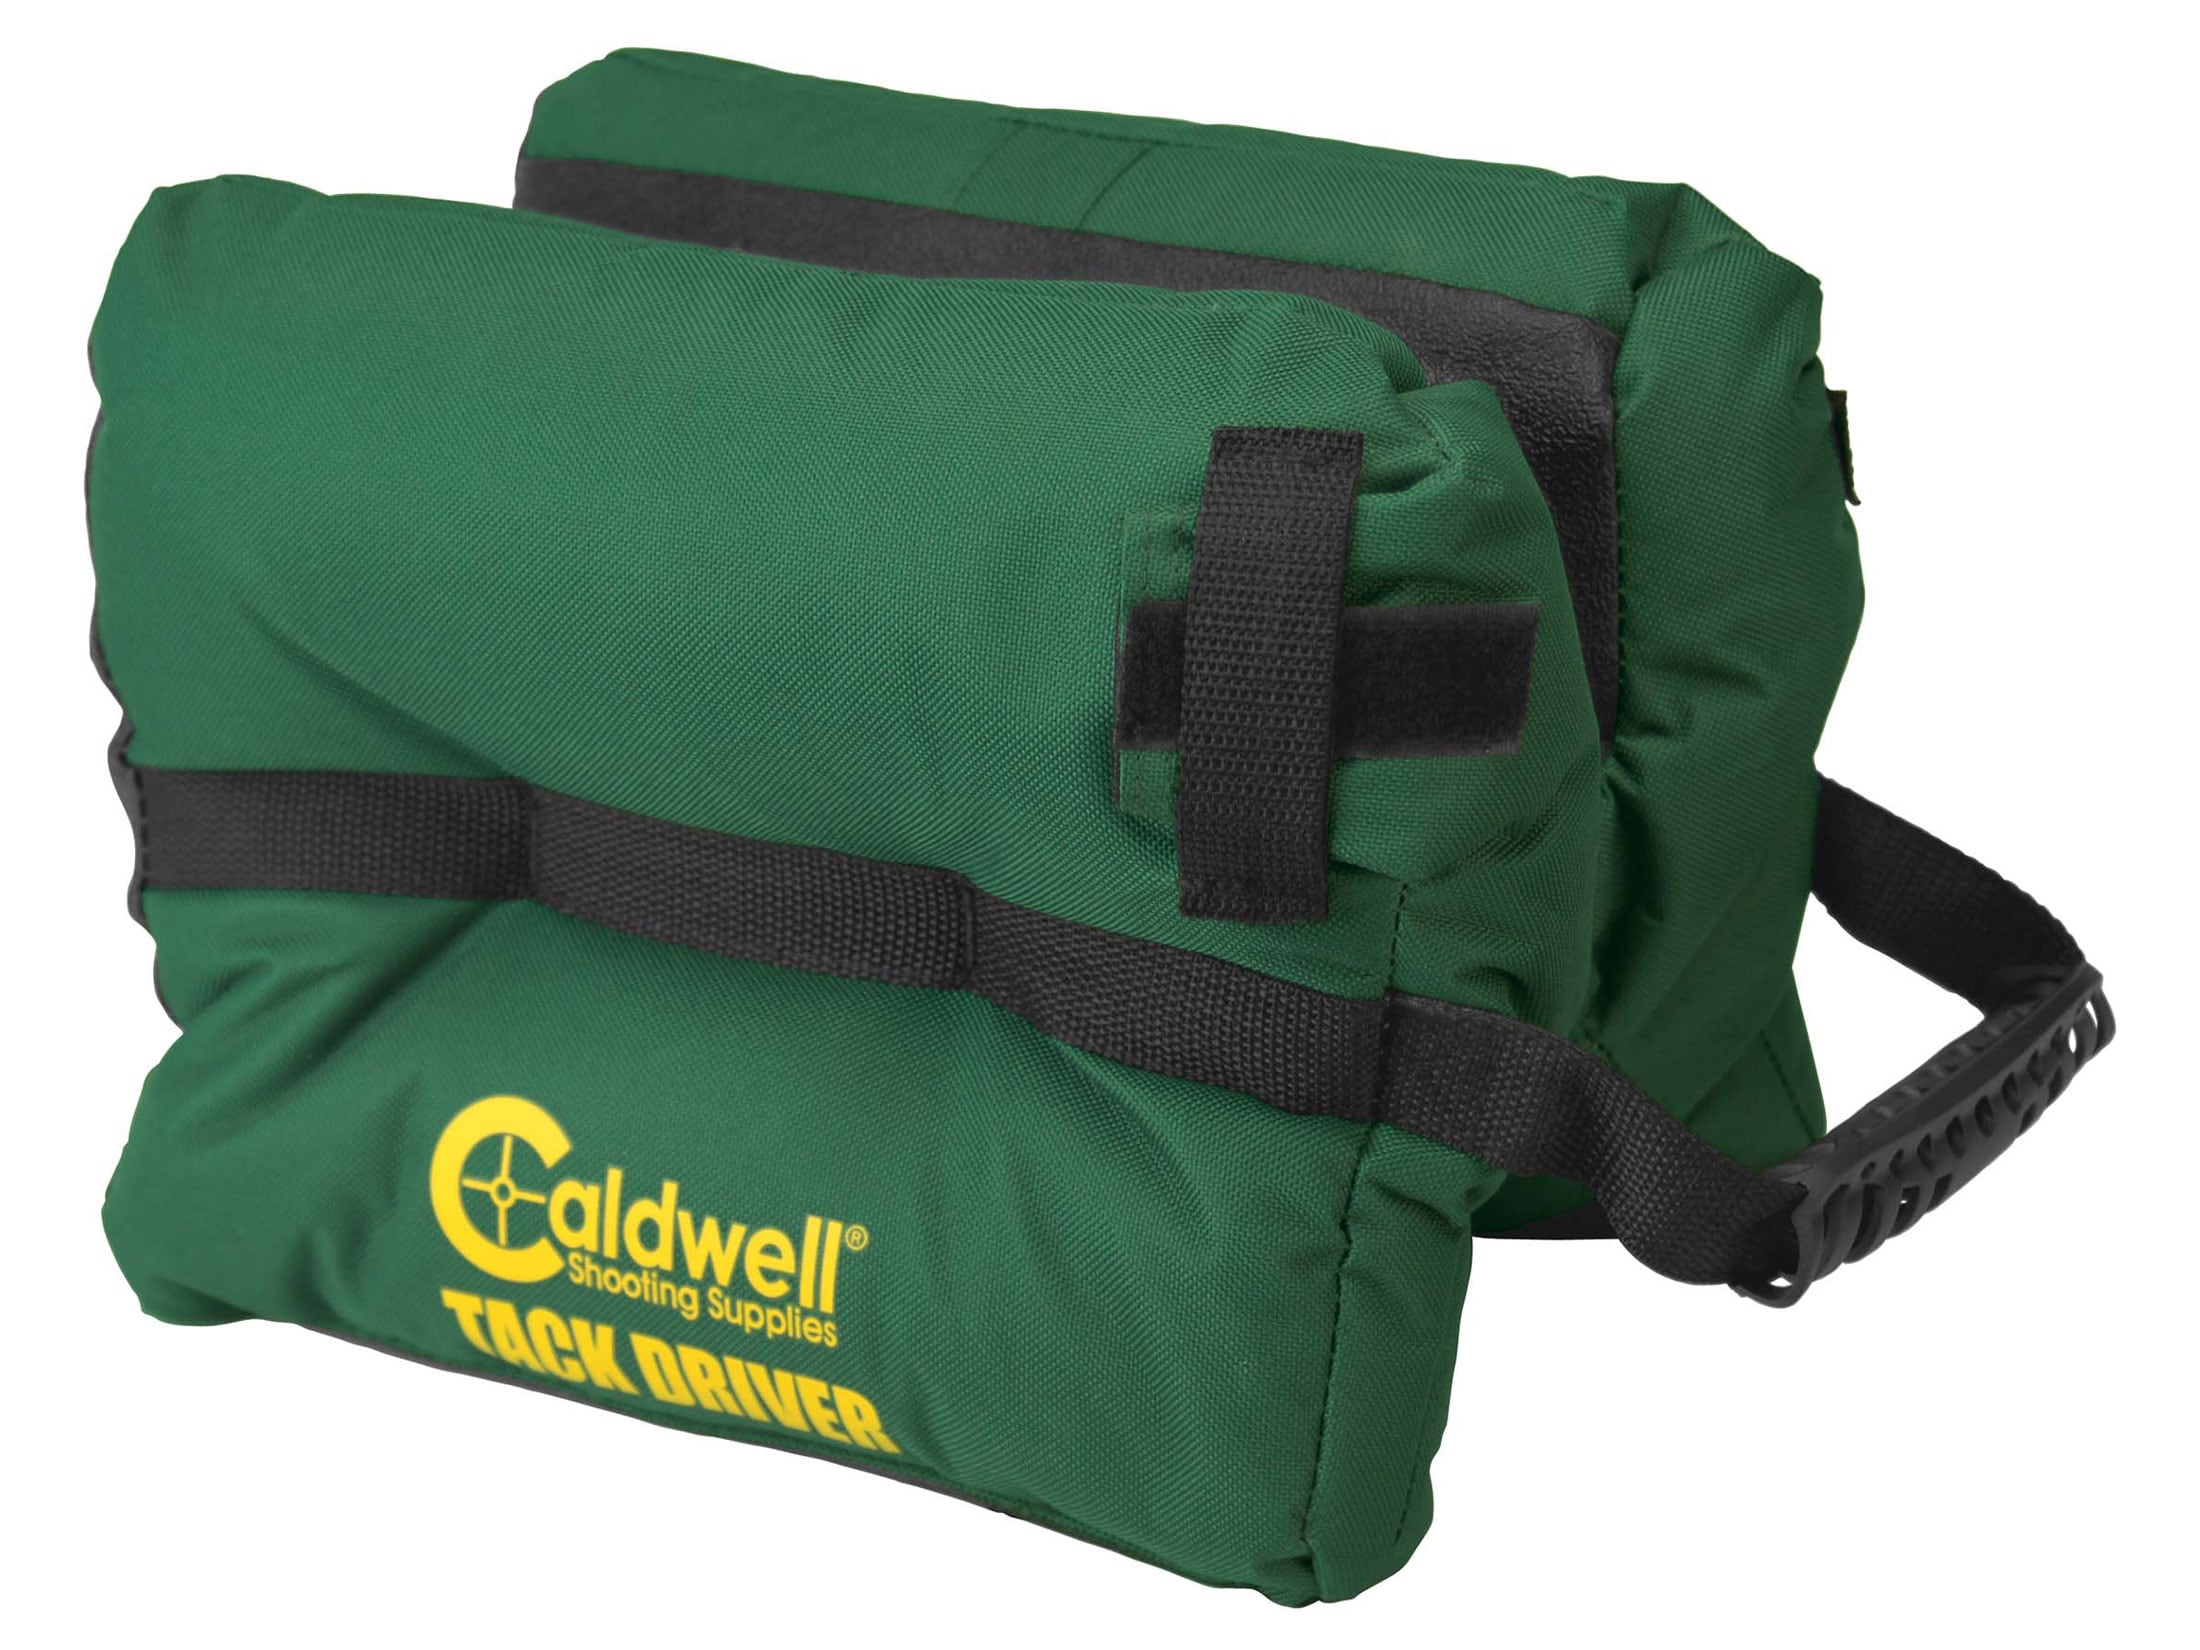 Caldwell TackDriver Shooting Rest Bag Nylon Green Filled For Sale